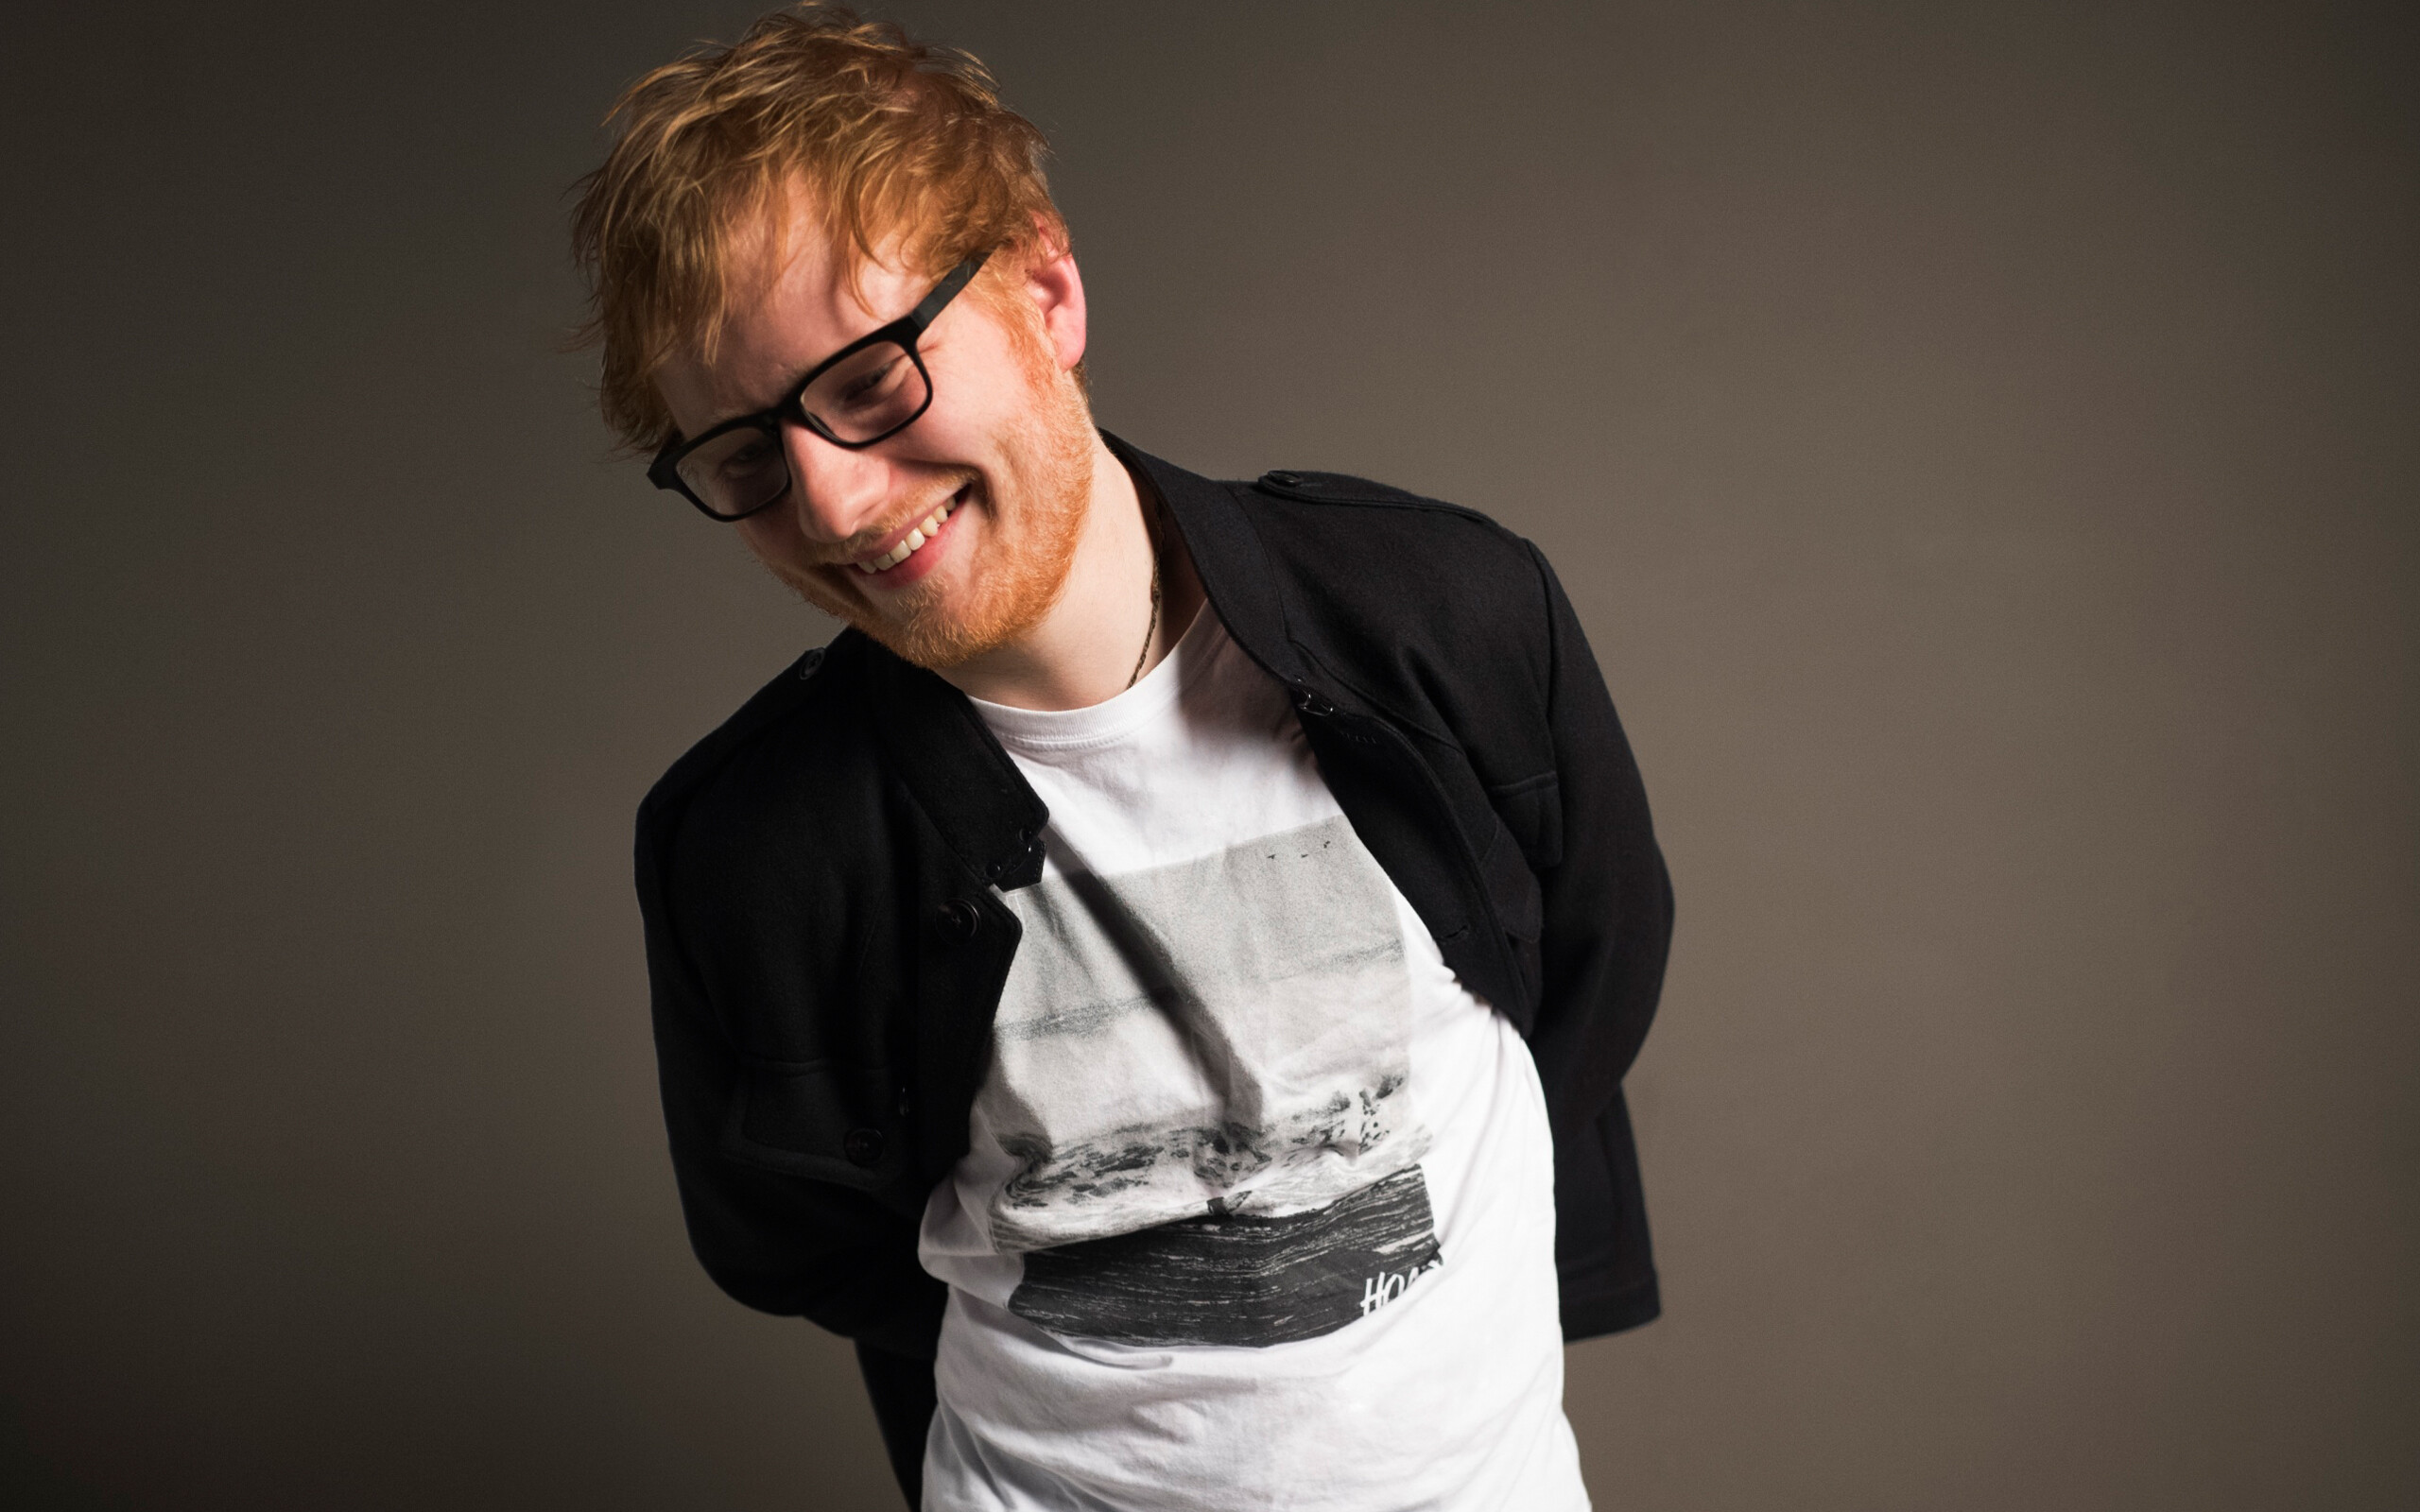 Ed Sheeran: "Sing" was released by Asylum Records UK on 7 April 2014. 2560x1600 HD Background.